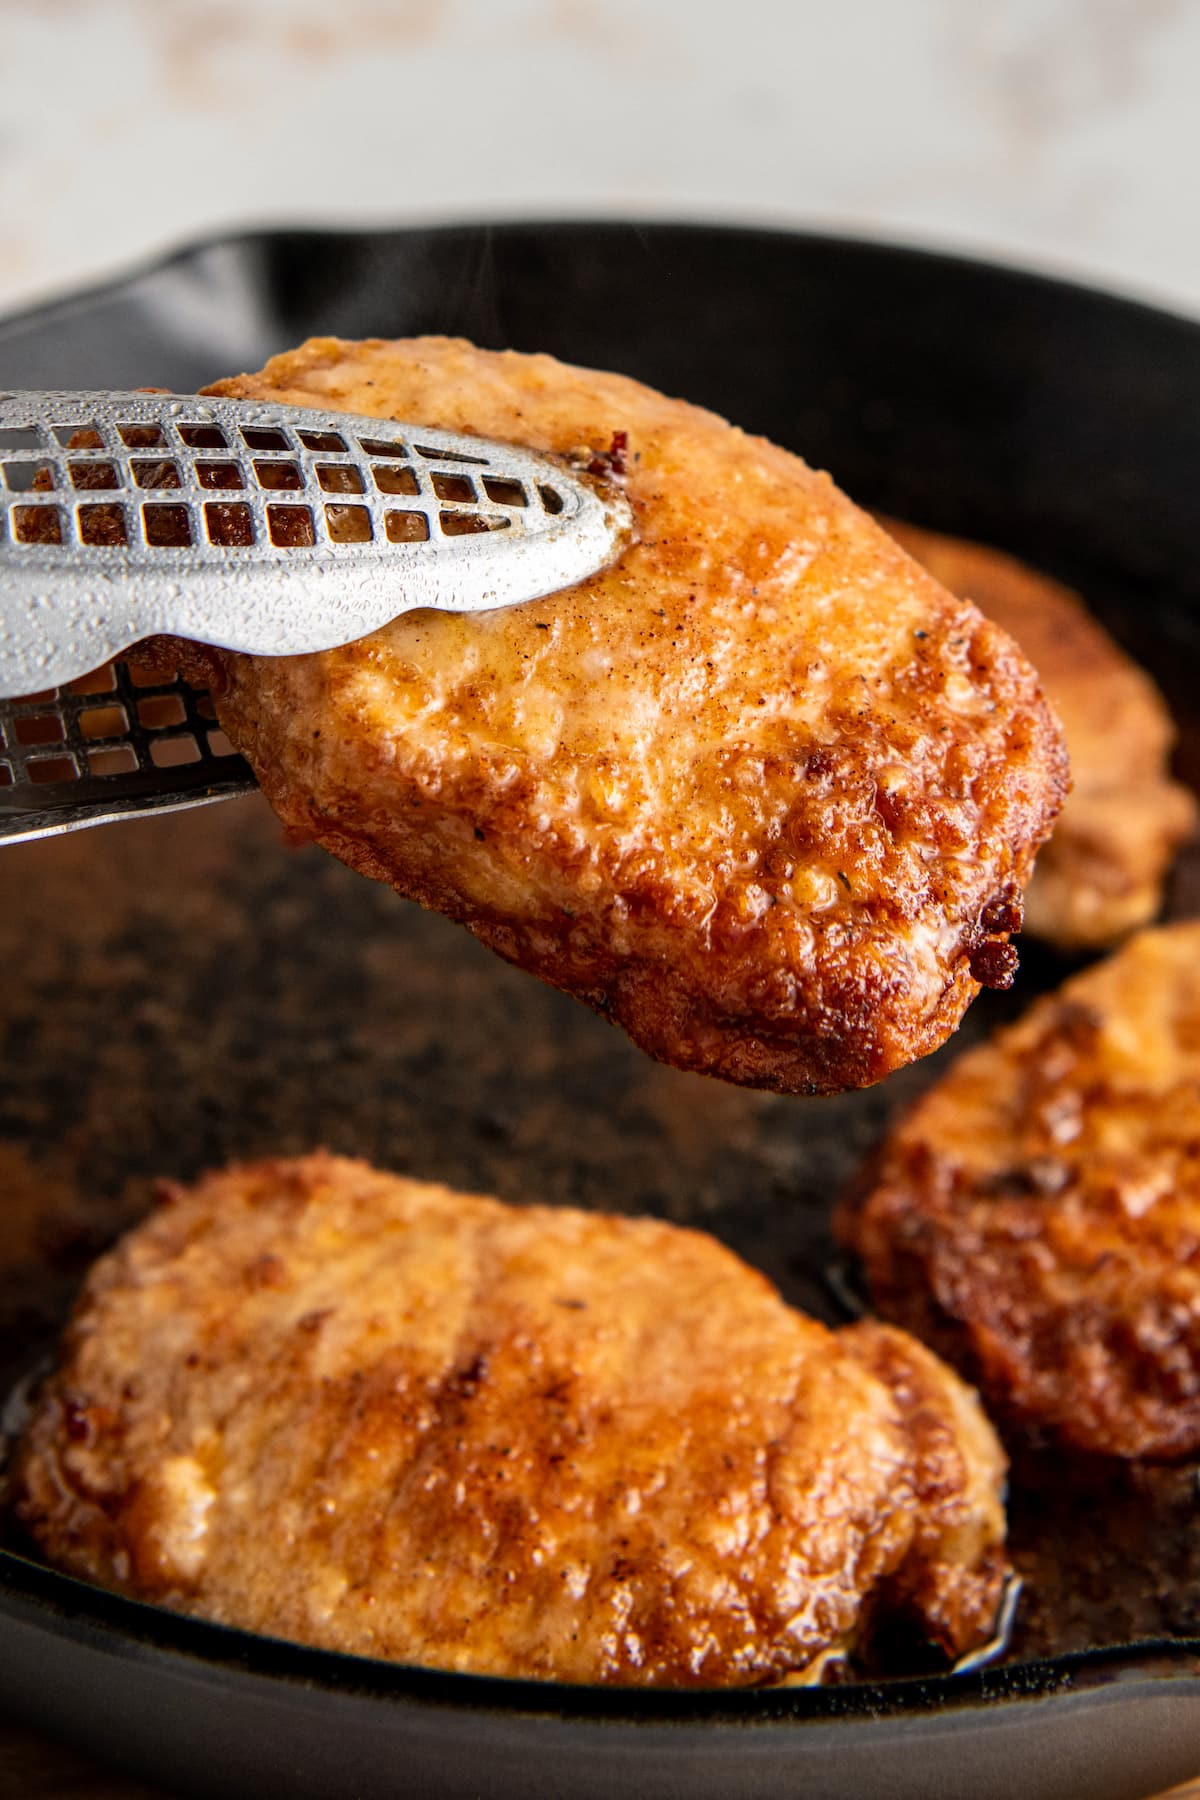 Tongs removing a crispy pork chop from a skillet